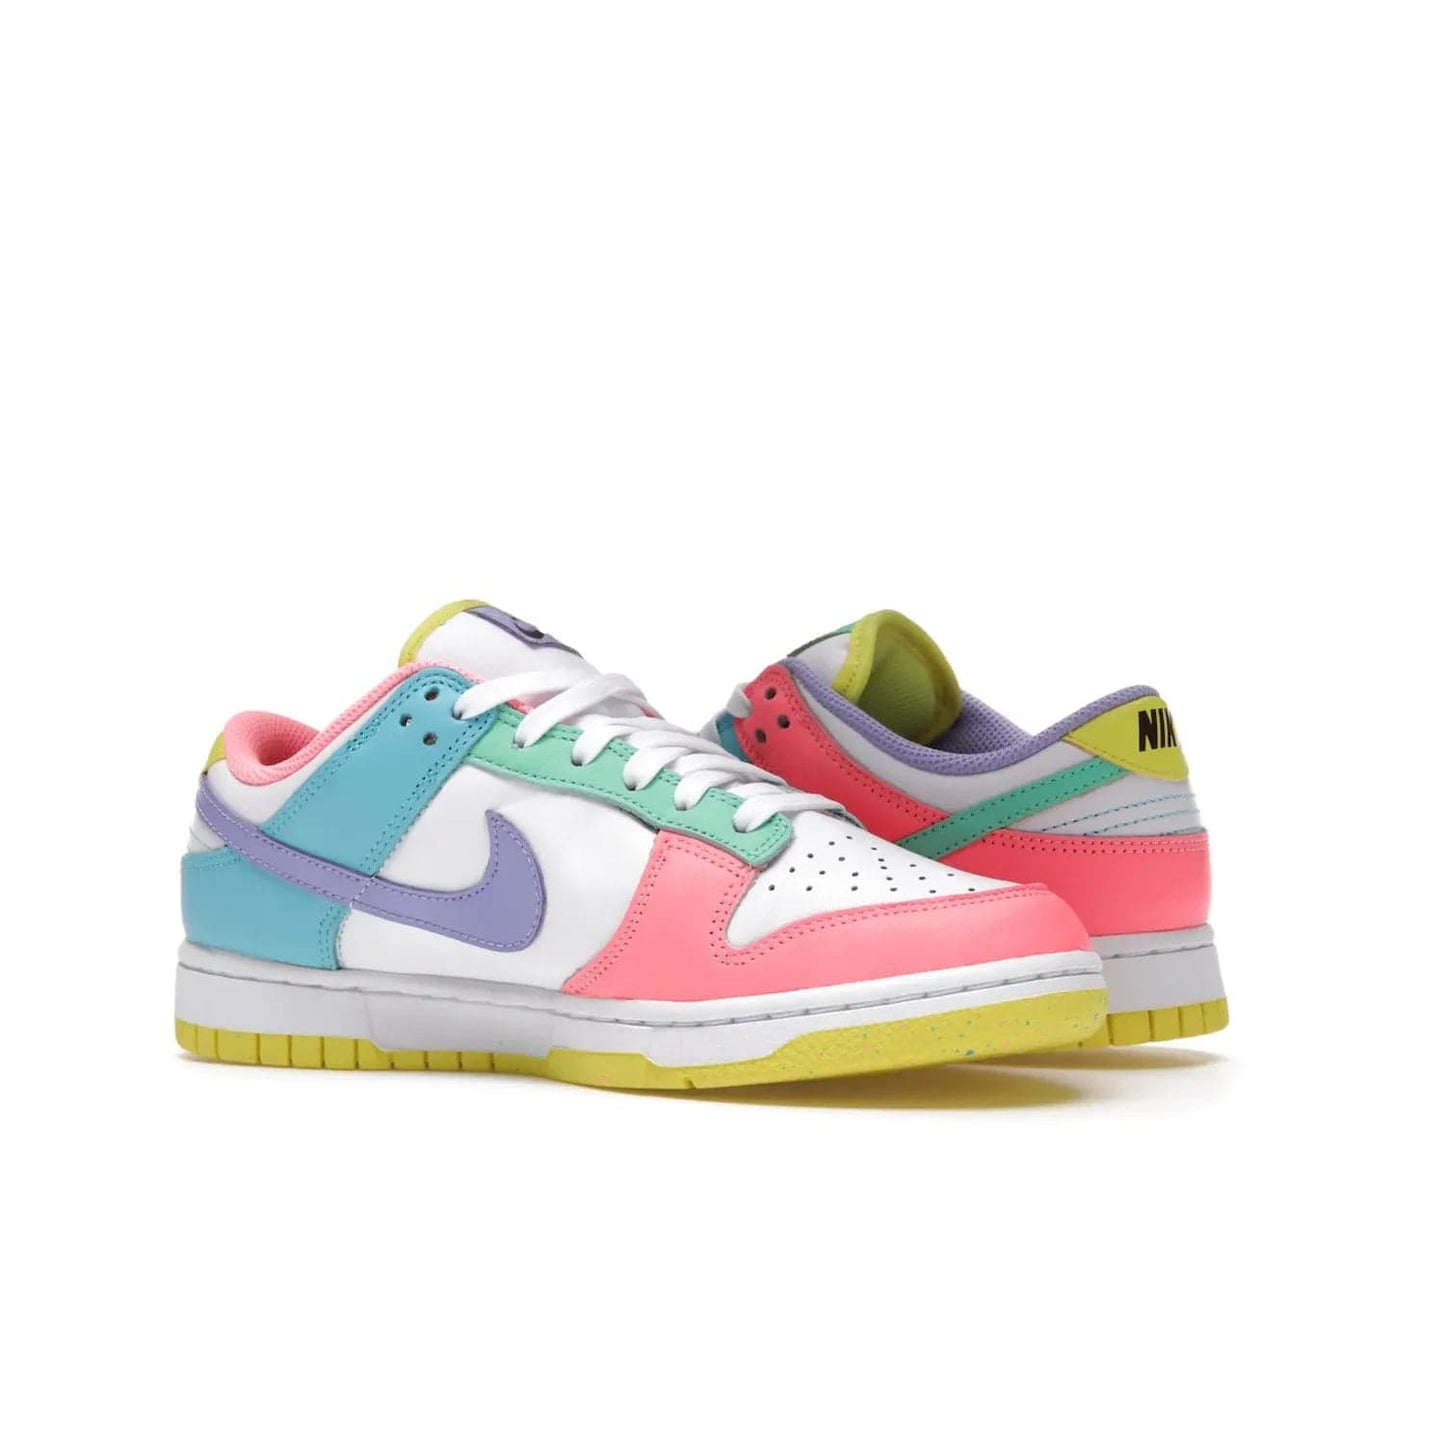 Nike Dunk Low SE Easter Candy (Women's) - Image 22 - Only at www.BallersClubKickz.com - UP
The Nike Dunk Low SE Easter Candy (Women's) brings a stylish touch to any outfit with its white leather upper, colorful accents, and multicolor speckle detailing. Shop now before they're gone.